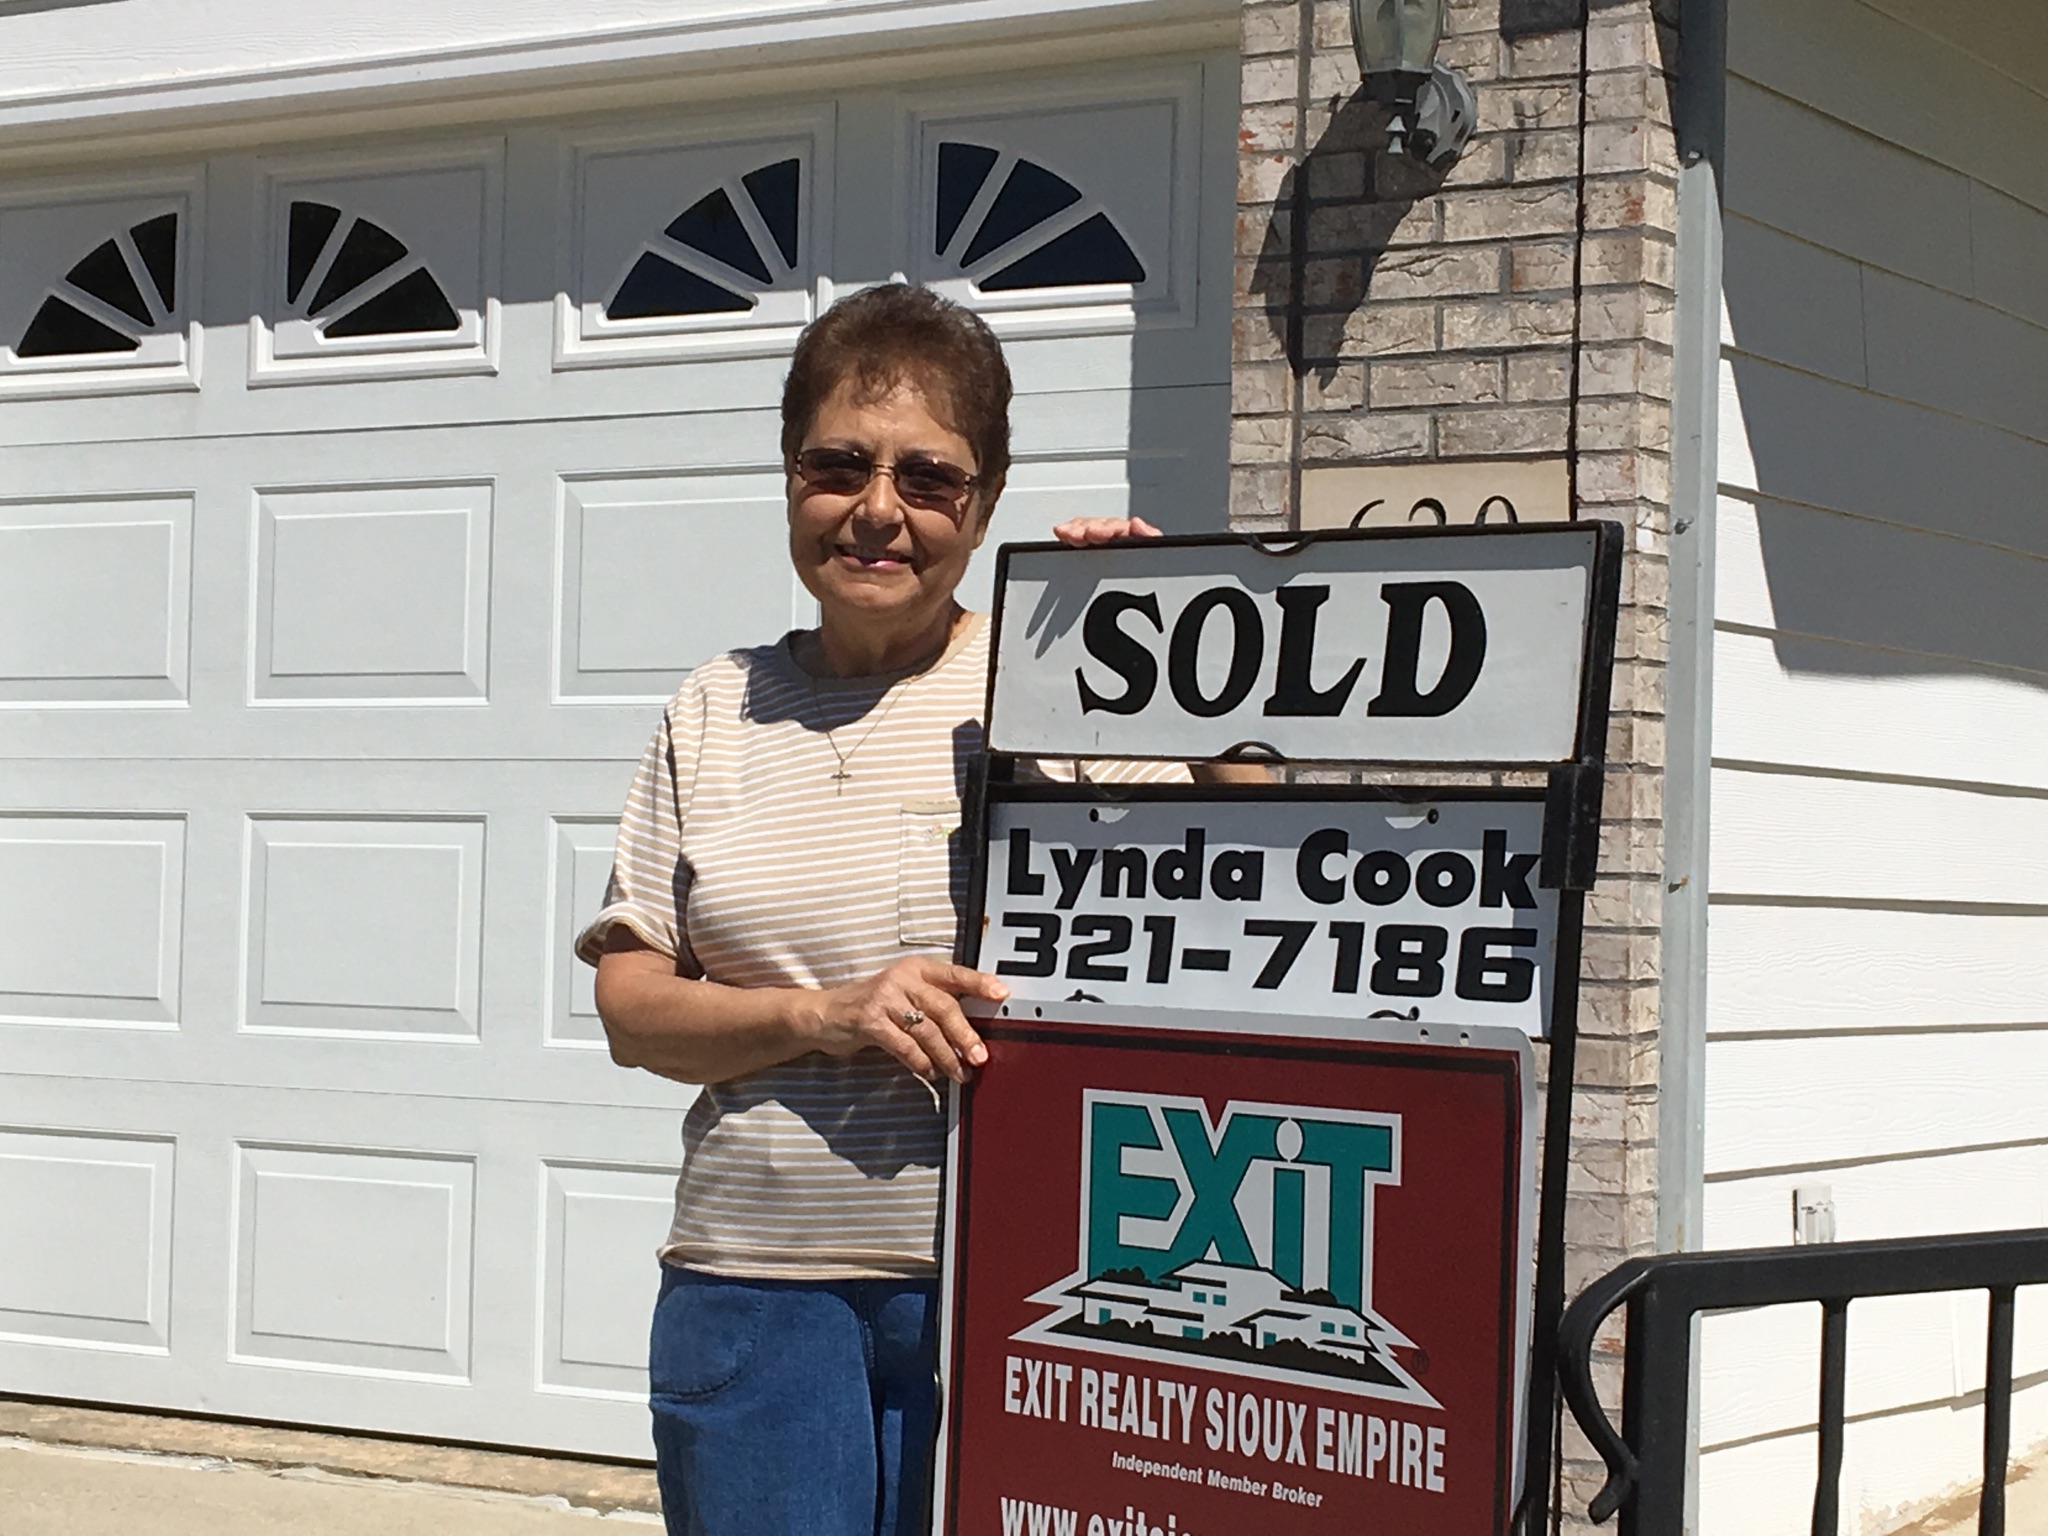 Lynda Cook, Broker/Owner sold another home in Tea, SD